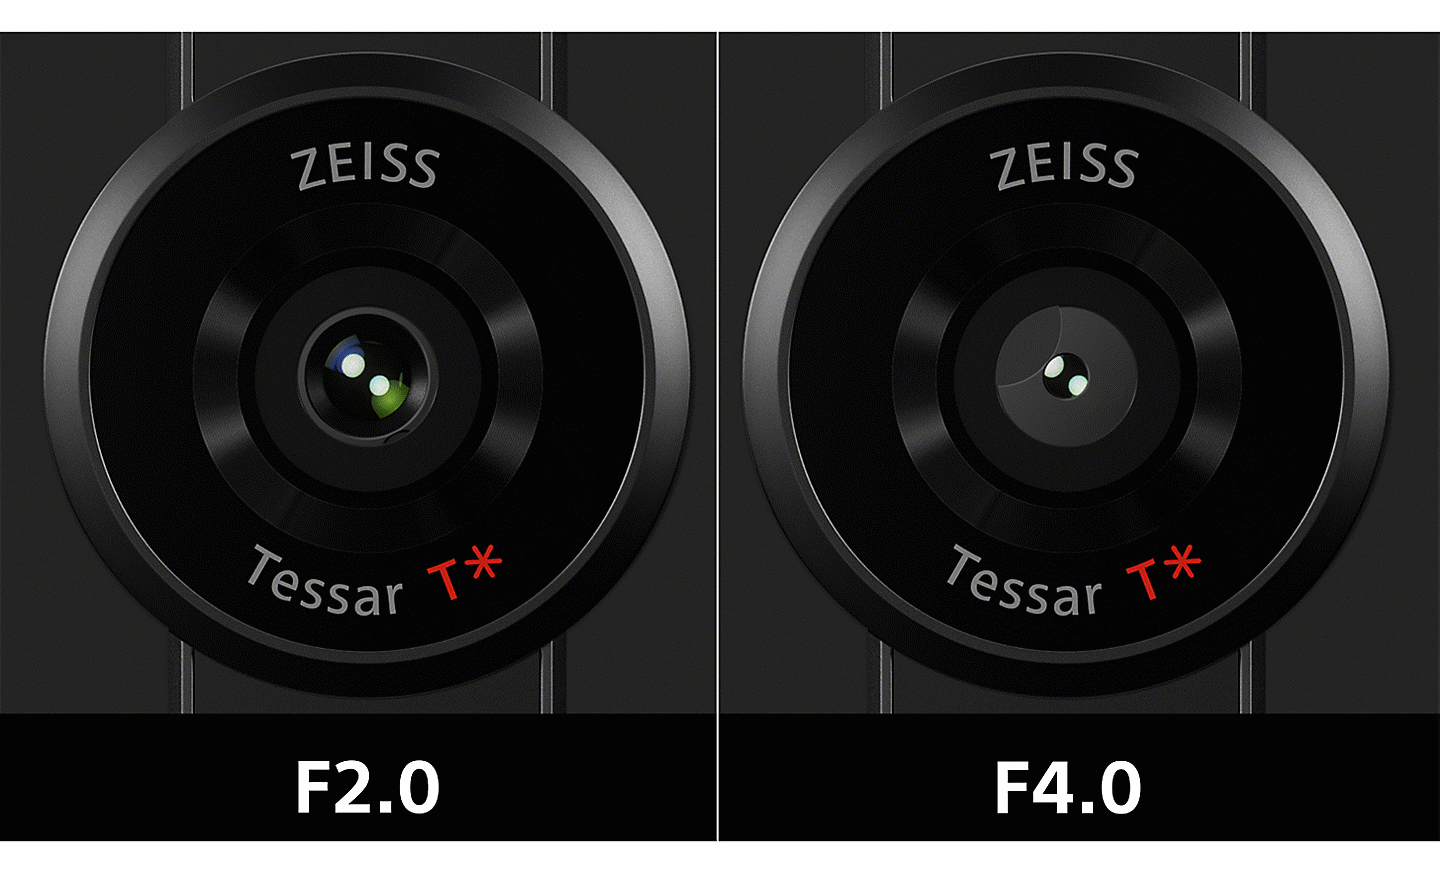 Split-screen image of ZEISS Tessar T* lens, comparing F2.0 aperture with F4.0